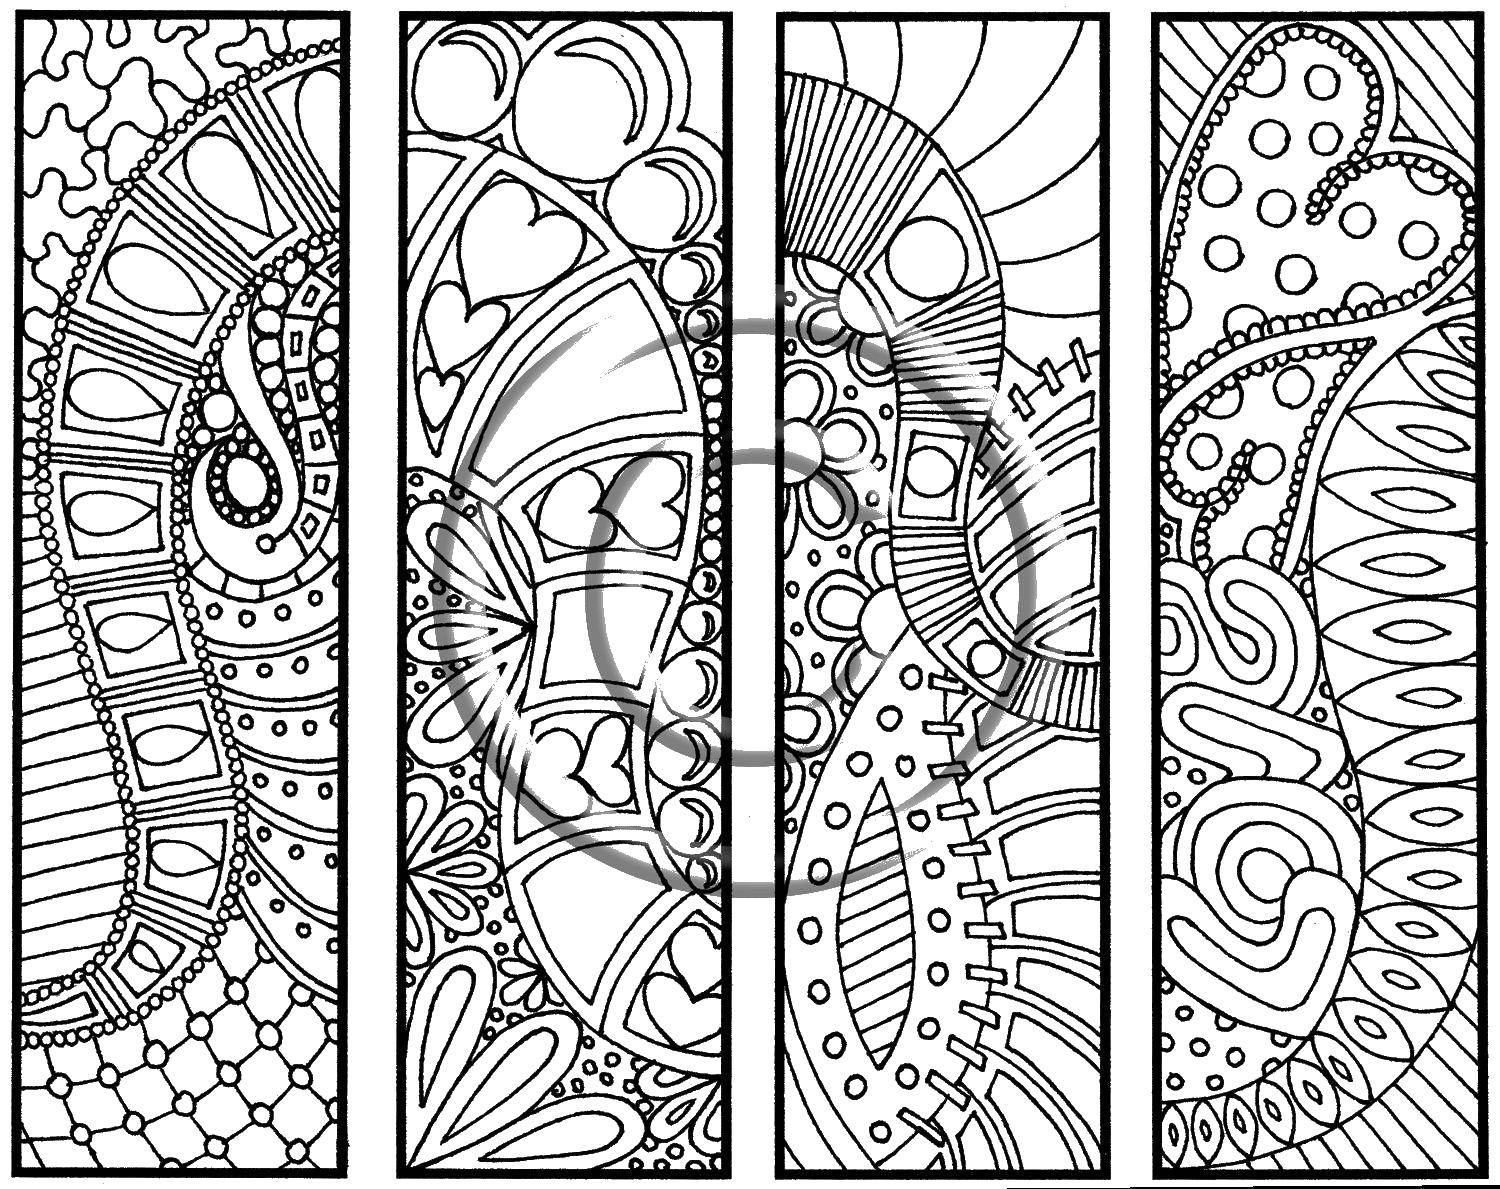 Coloring Floral patterns. Category patterns. Tags:  Patterns, flower.